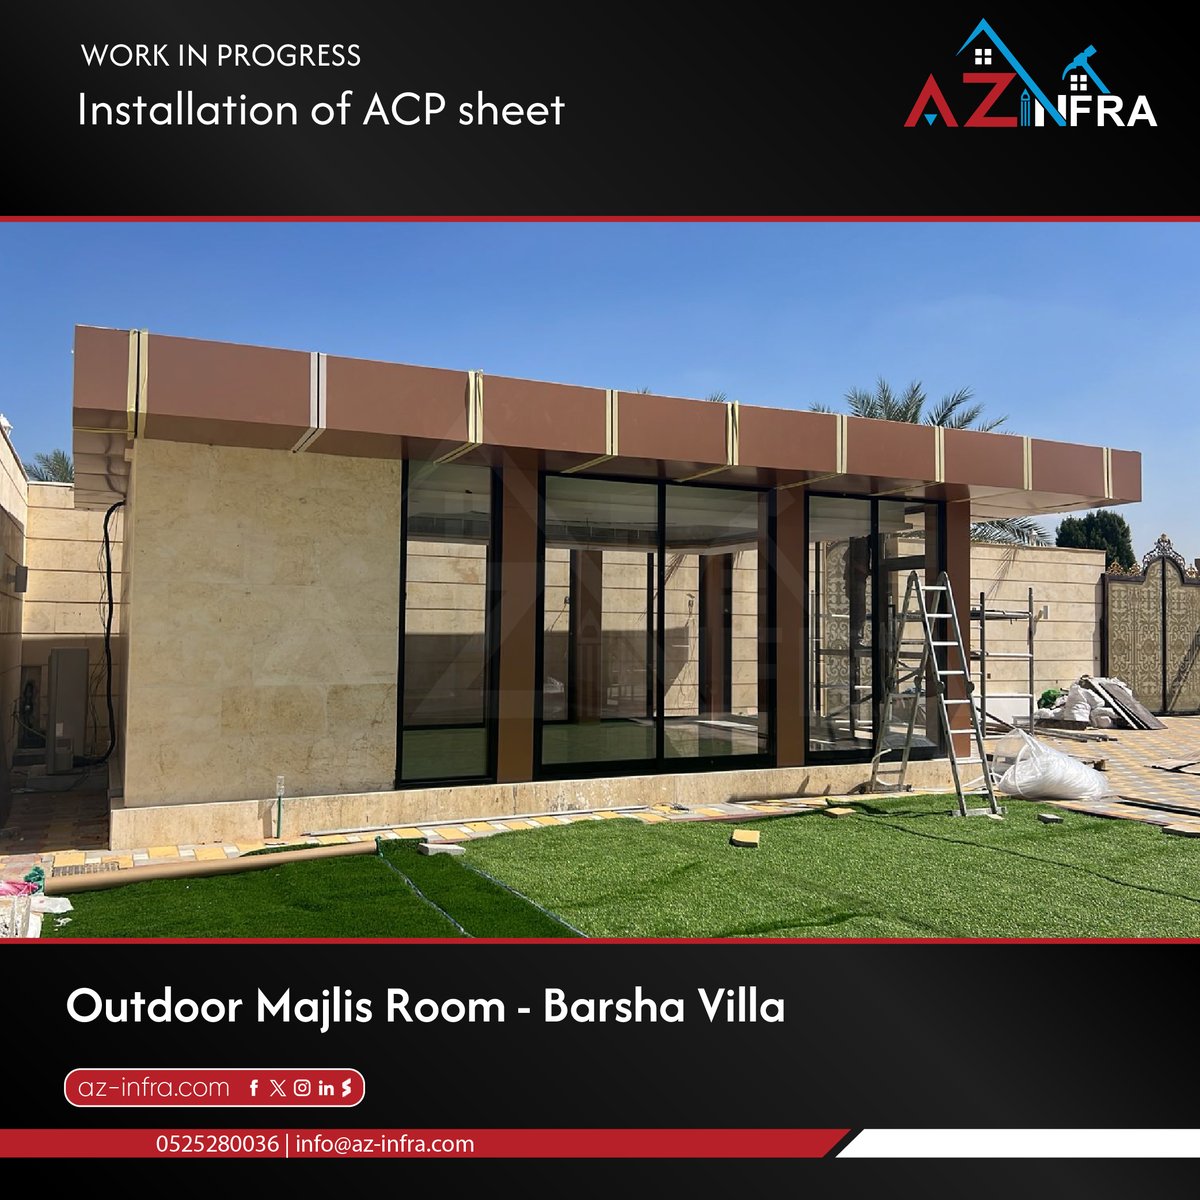 A majlis is a must have at every villa in UAE. A place where you host your guests and family. Check out this super #ACPSheet installation for our client in #Barsha who got this awesome outdoor Majlis room done. 

Need something similar ? Get in touch on : 0525280036